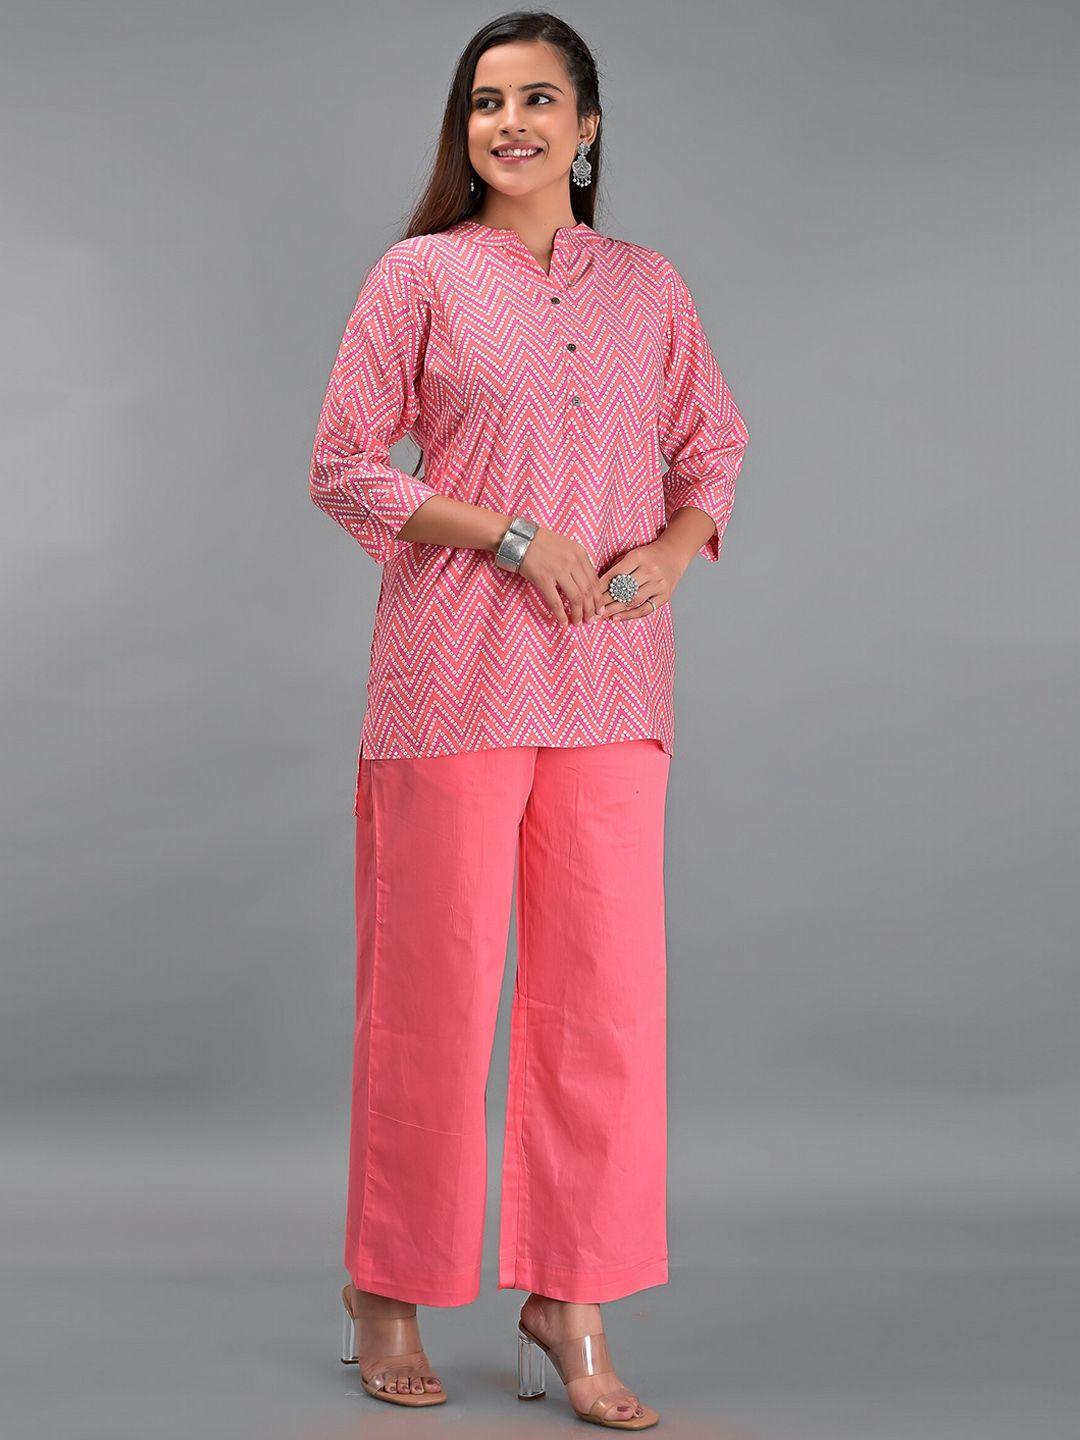 etnicawear women pink printed pure cotton kurti with trousers